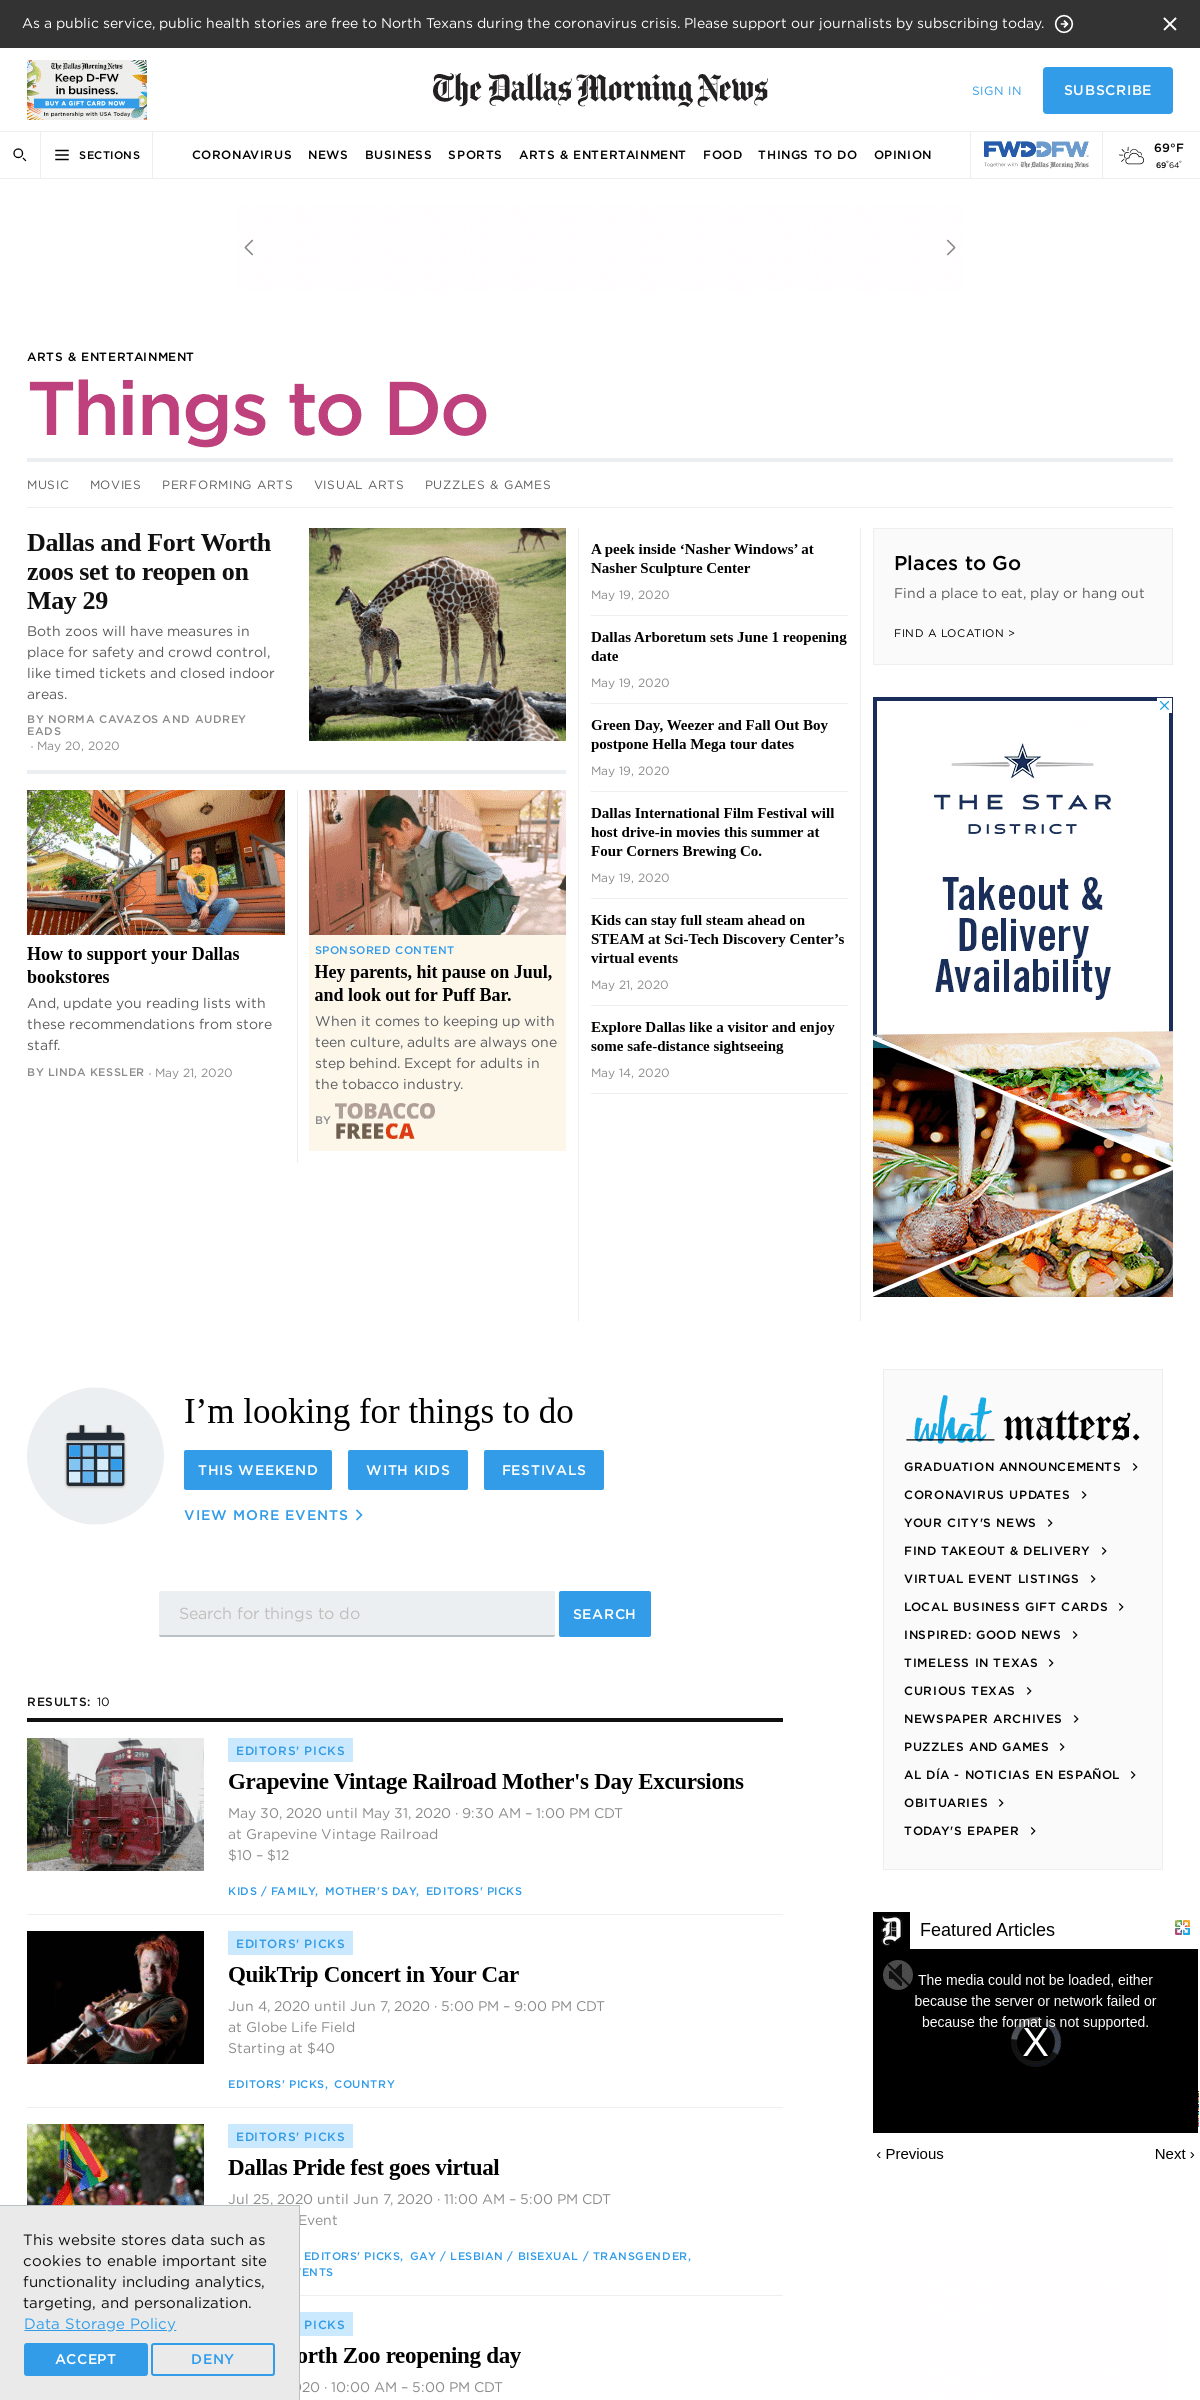 A complete backup of guidelive.com